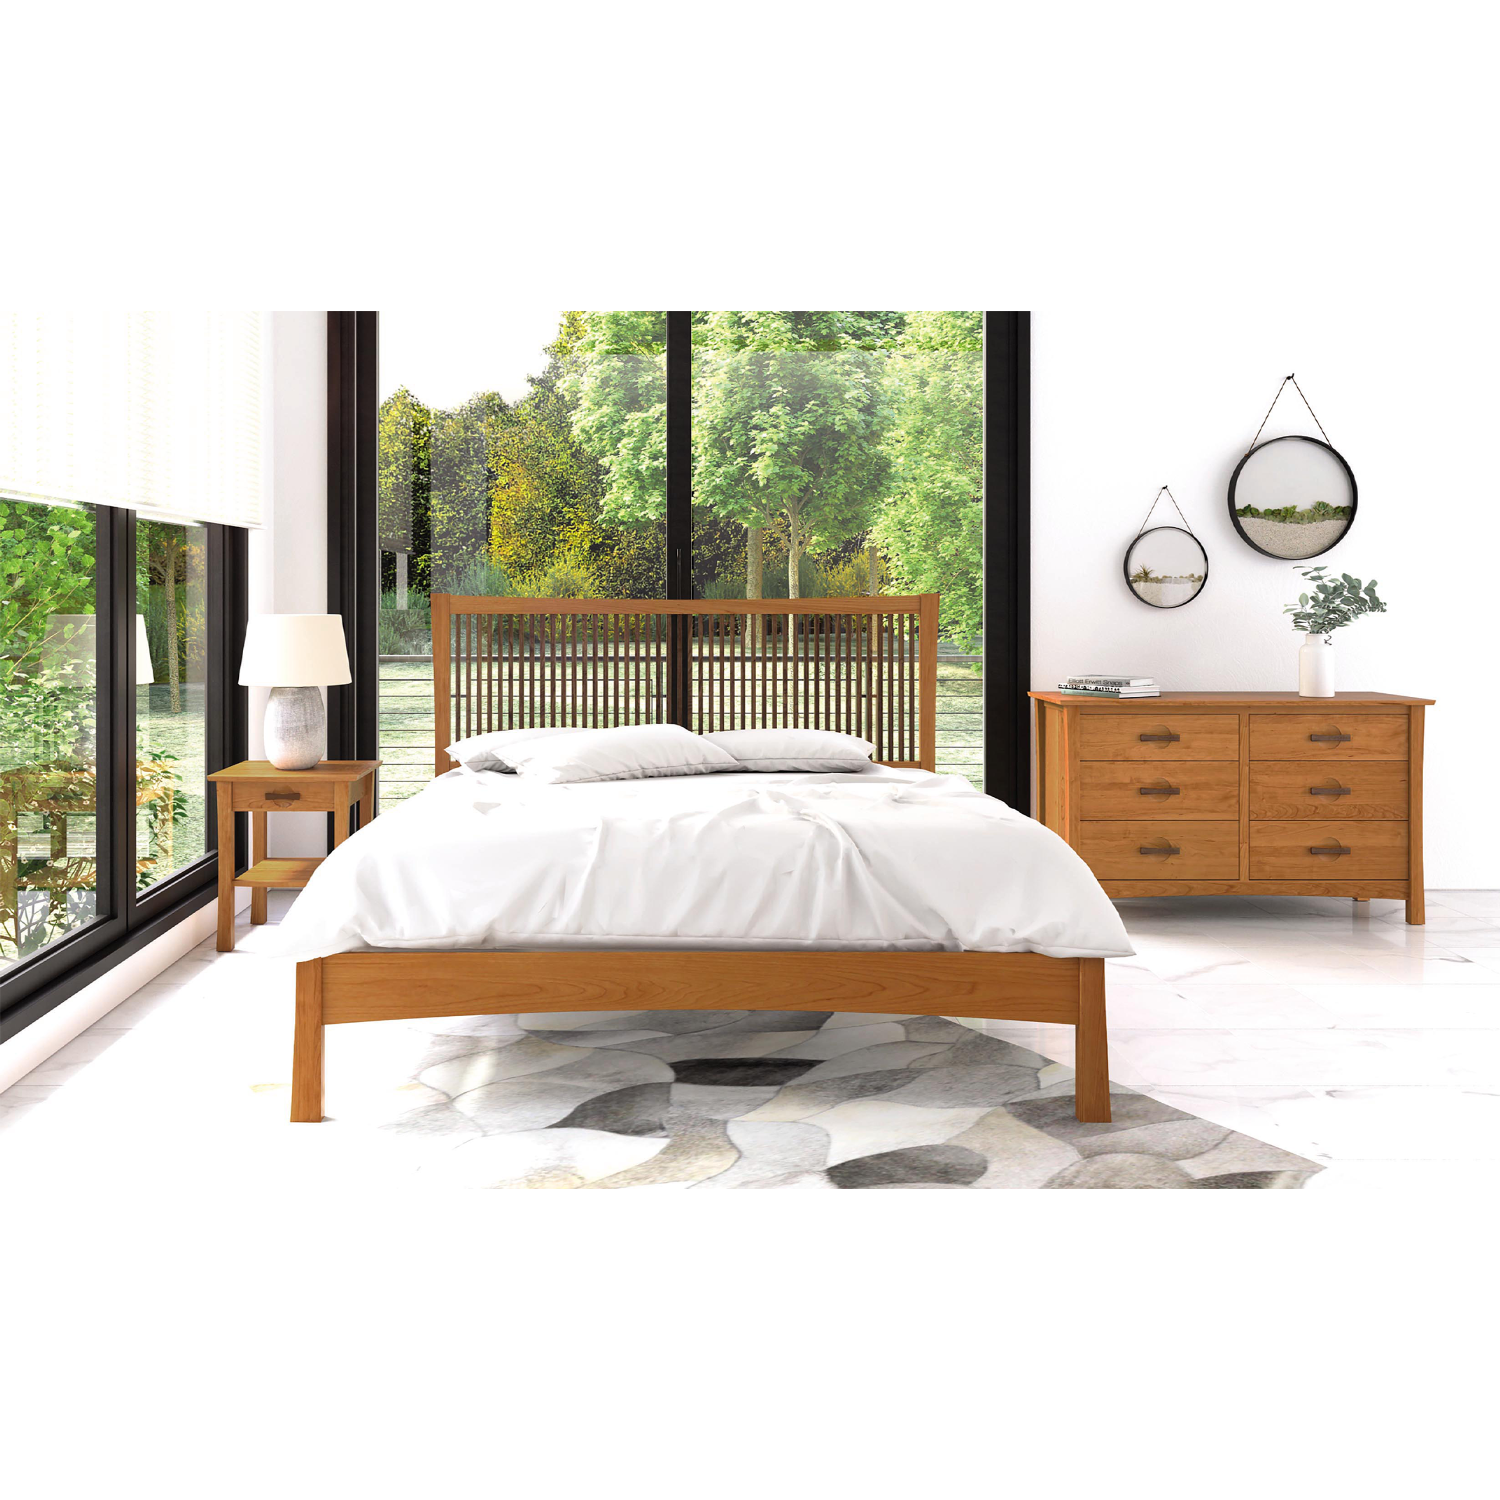 Berkeley Craftsman Style Bedroom Collection by Copeland Furniture in Vermont